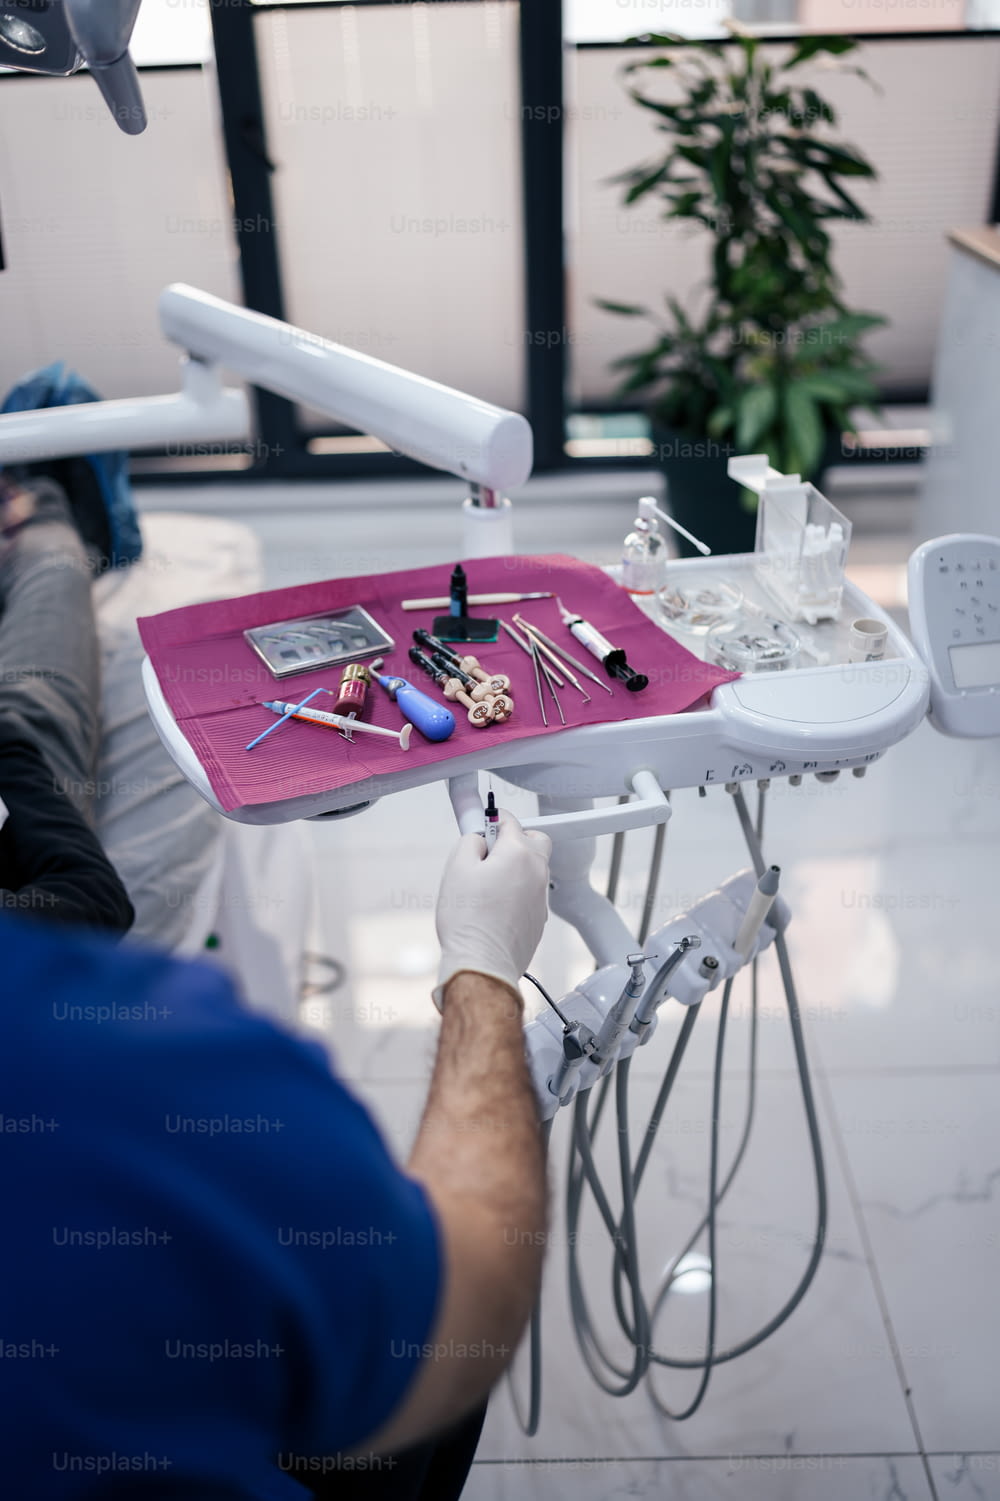 a man is sitting in a dentist chair with tools on it